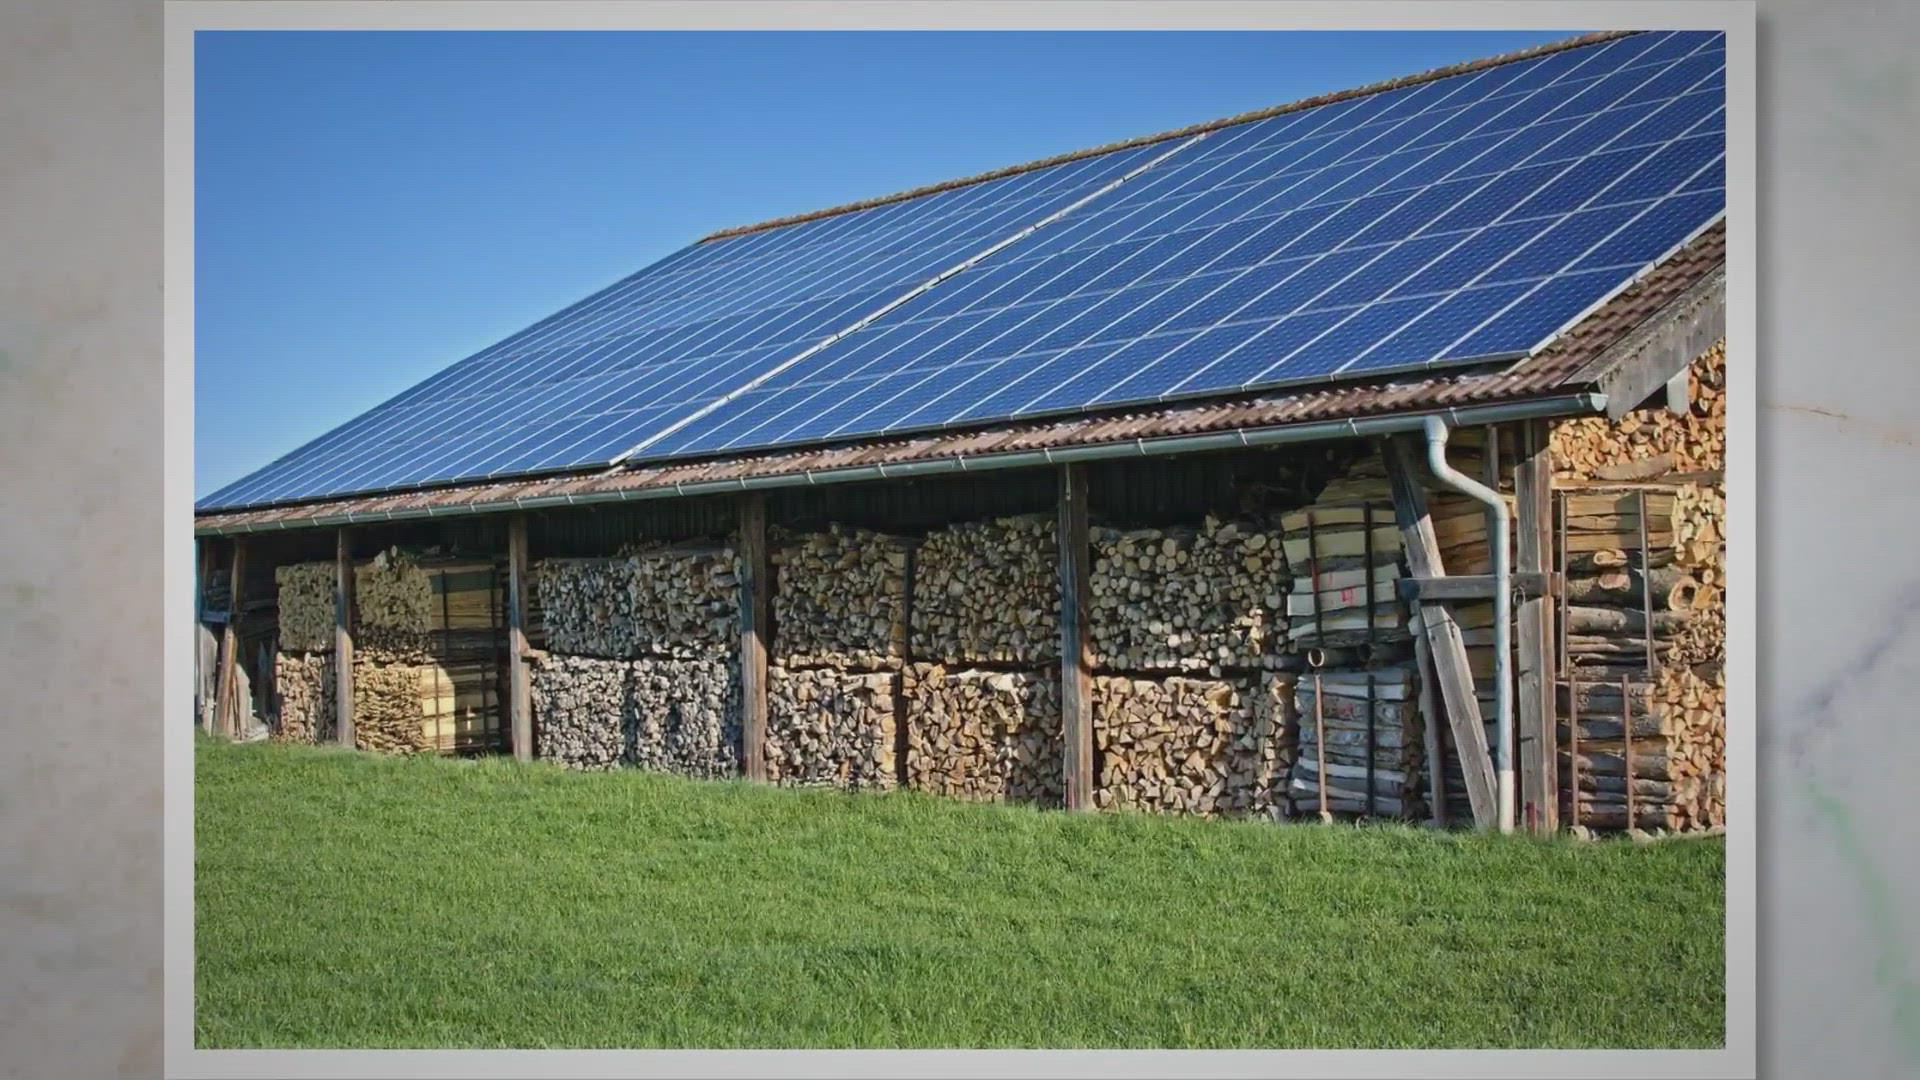 'Video thumbnail for 5 Things To Know Before You Consider Getting Solar Panels'